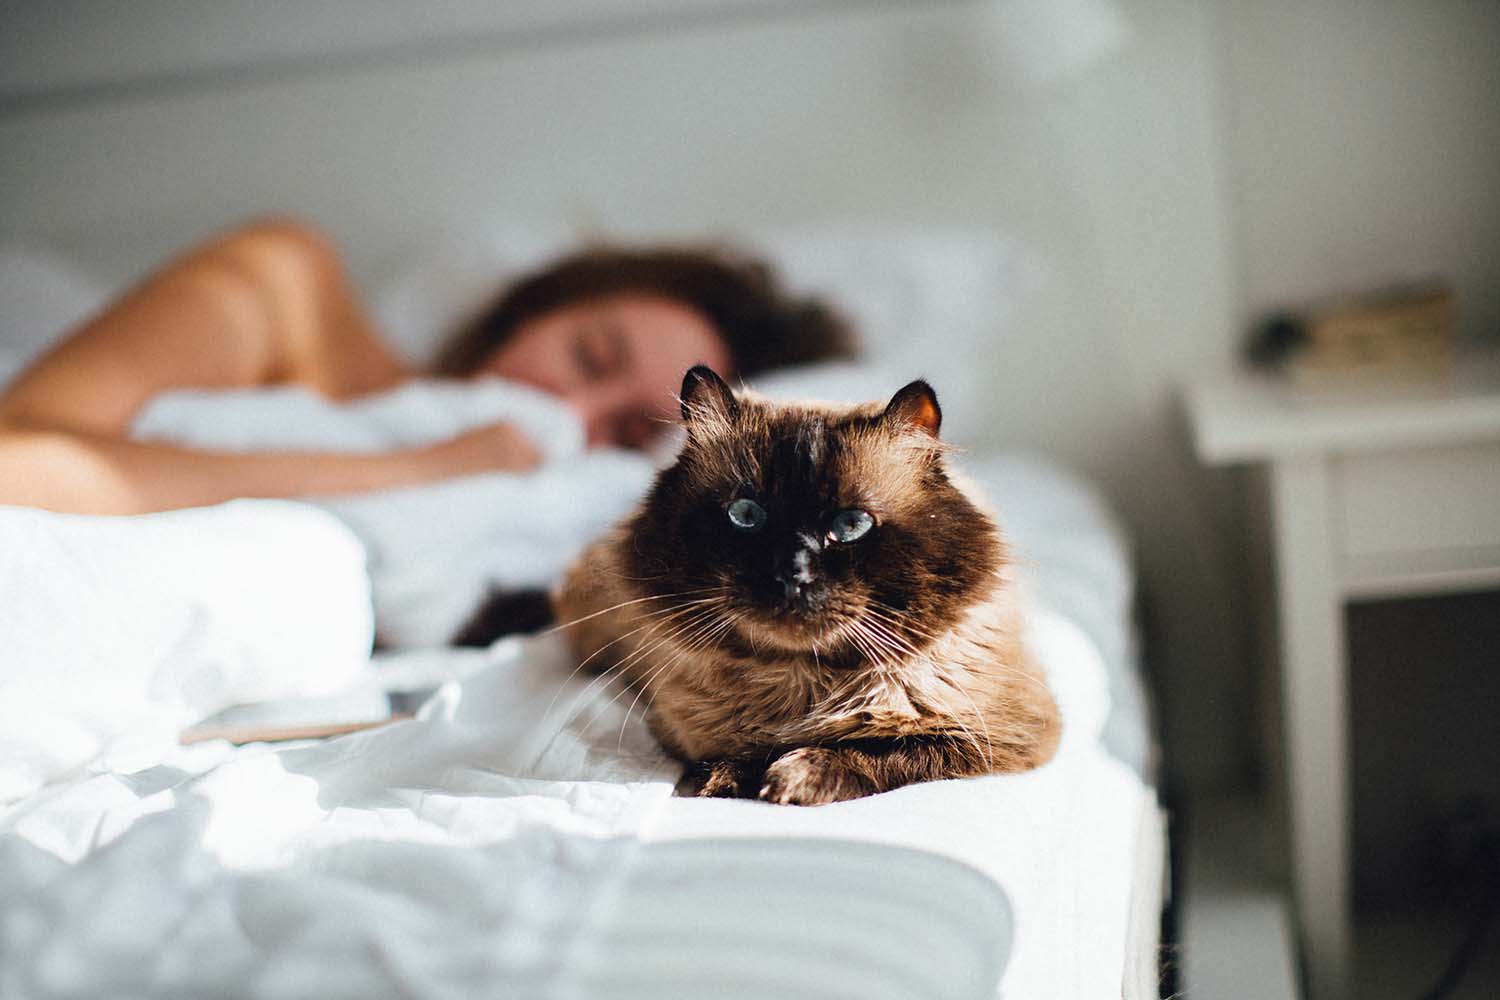 cat awake on the side of a bed with a woman asleep in the background